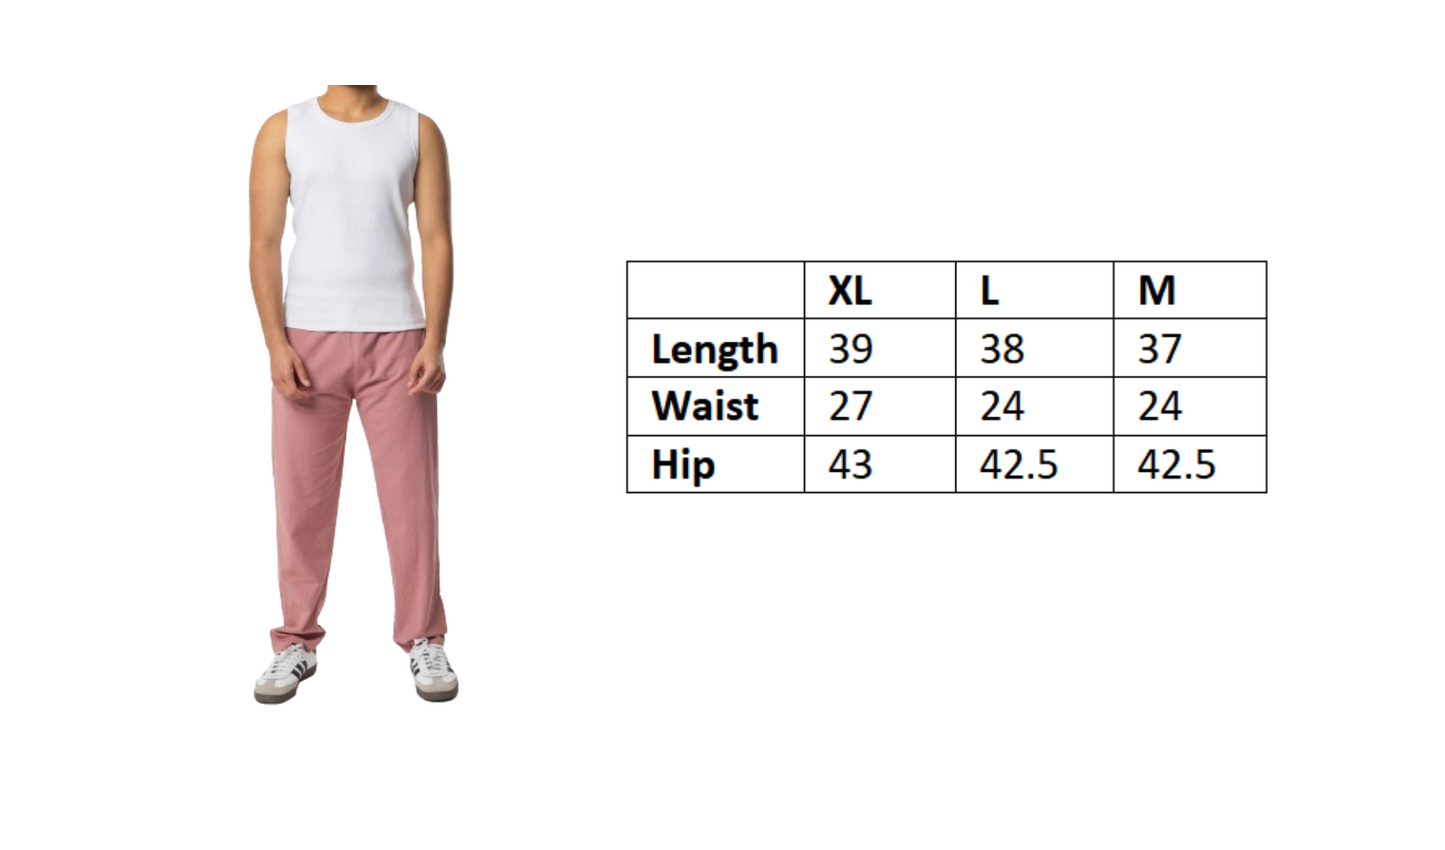 The Linen Pant Pink